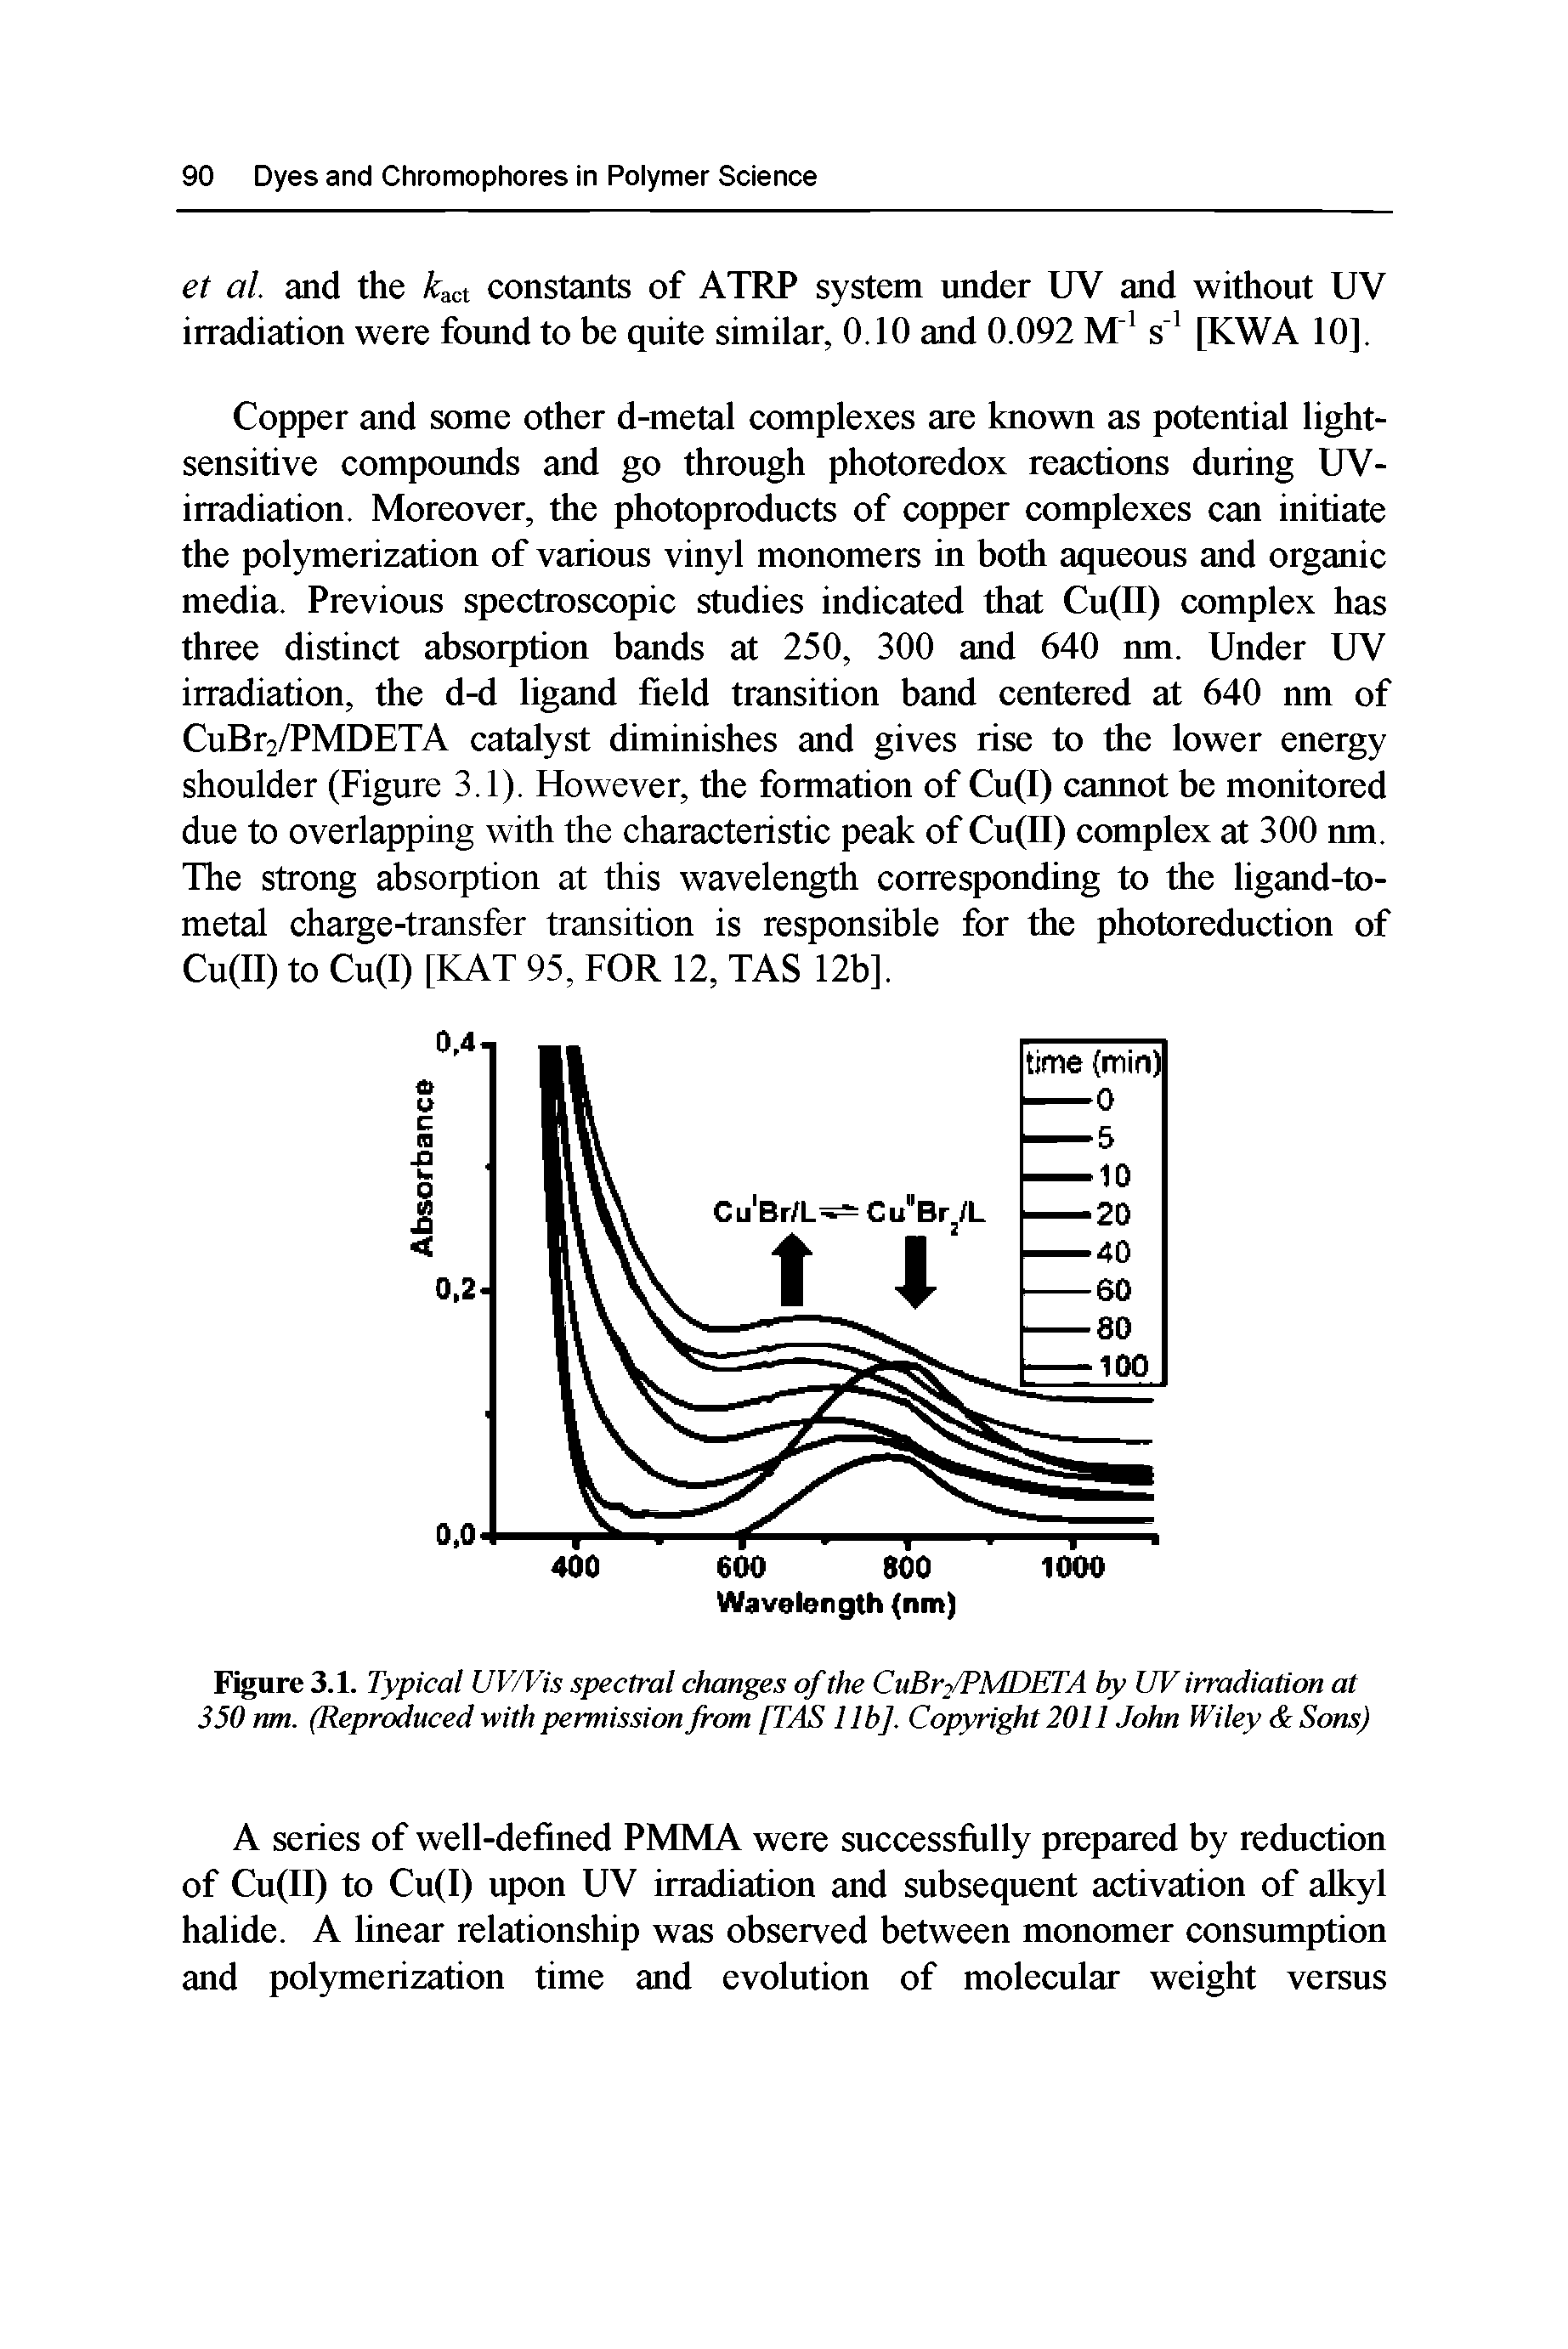 Figure 3.1. Typical UV/Vis spectral changes of the CuBrfPMDETA by UV irradiation at 350 nm. (Reproduced with permission from [TAS 11b]. Copyright 2011 John Wiley Sons)...